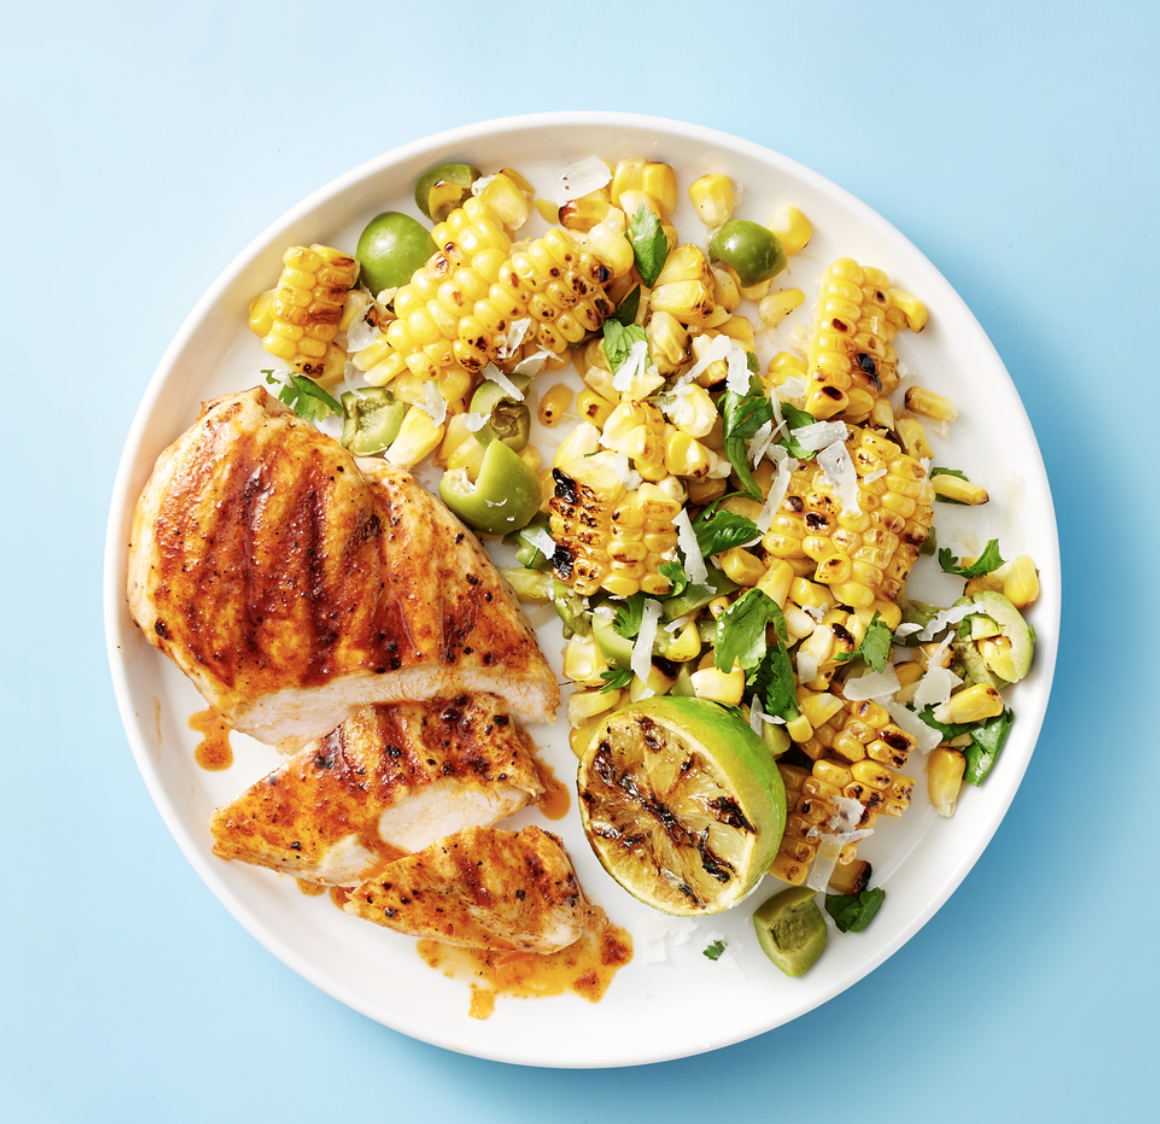 grilled chicken with smoky corn salad